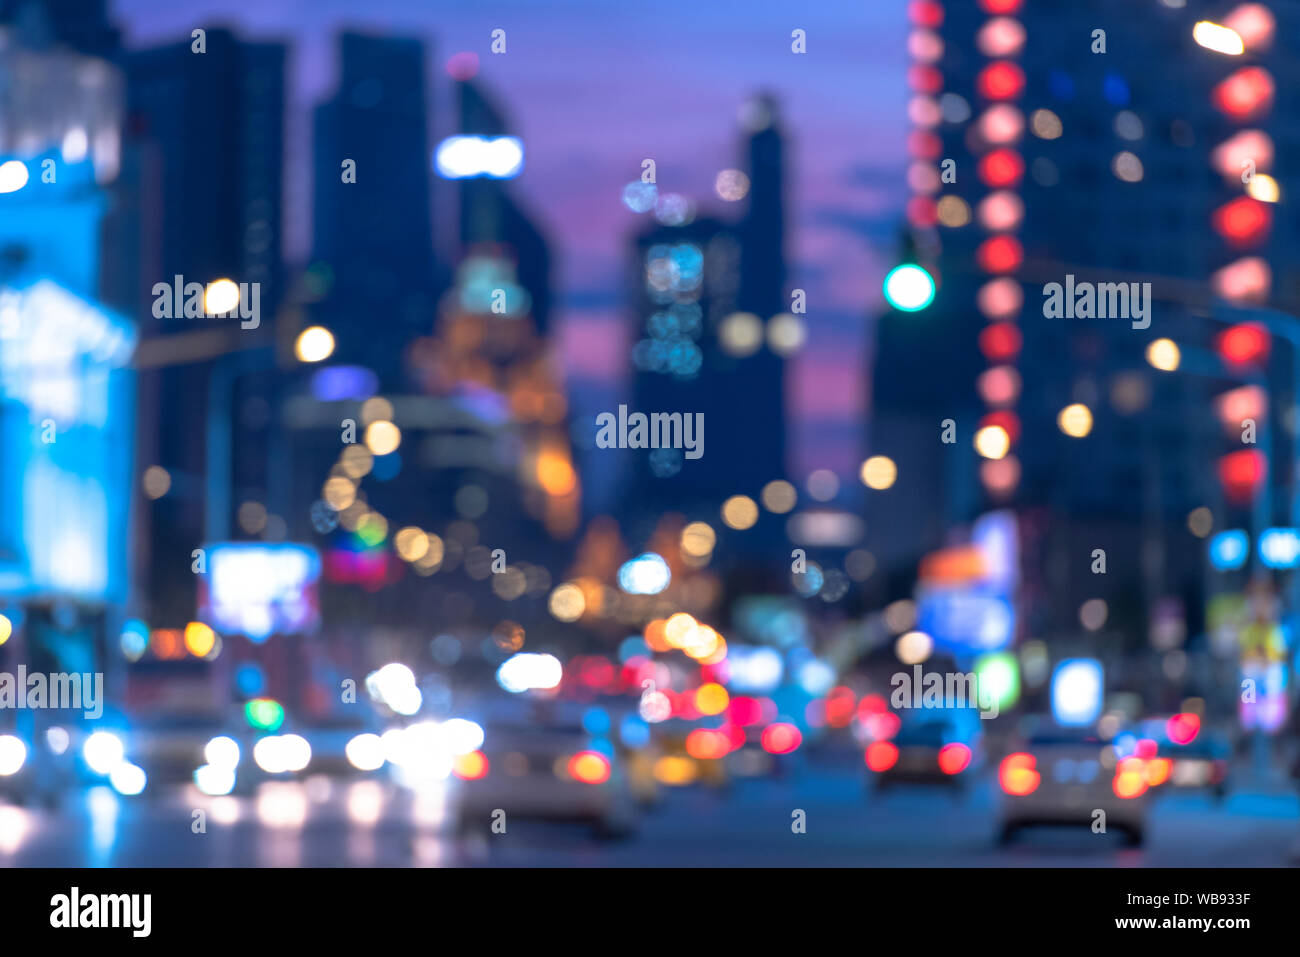 City, blurred Background, defocused picture of City with lights and cars, night life as background, Moscow Stock Photo